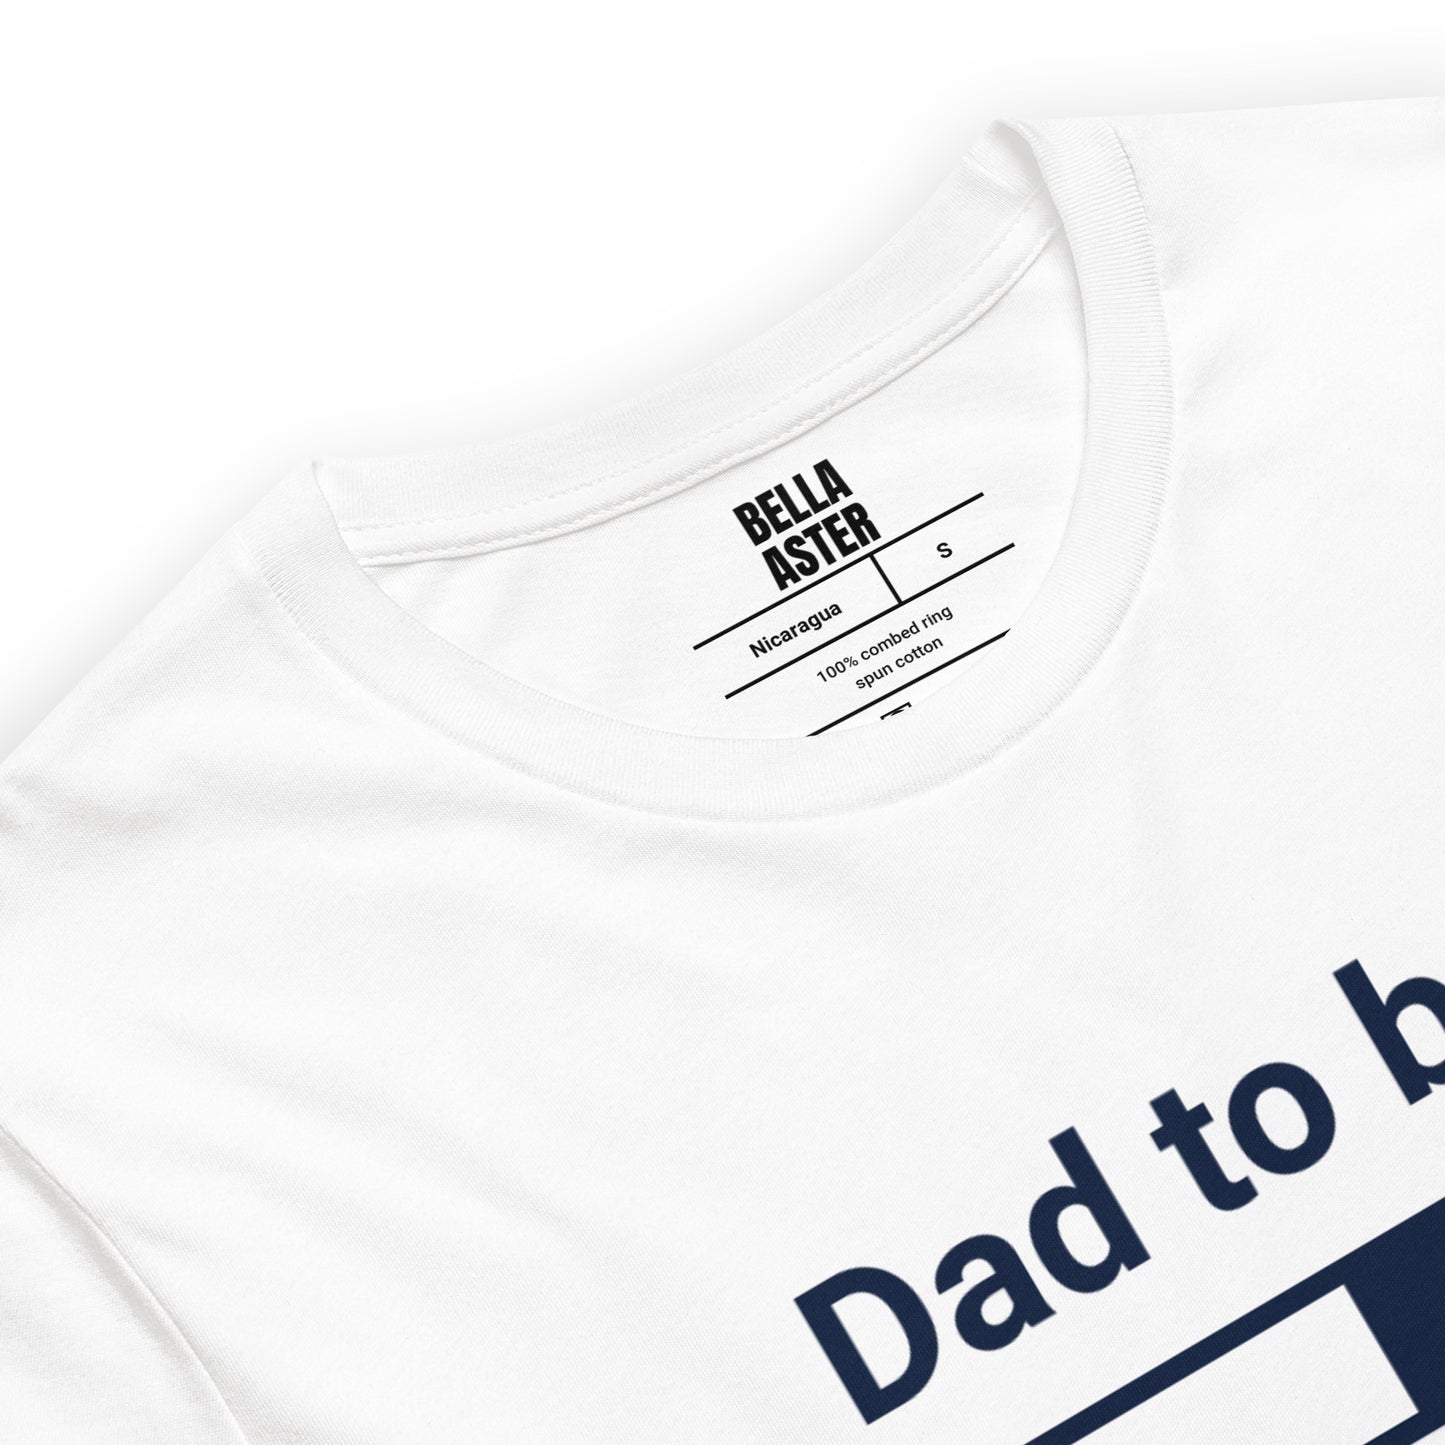 Dad To Be Loading Short-Sleeve T-Shirt